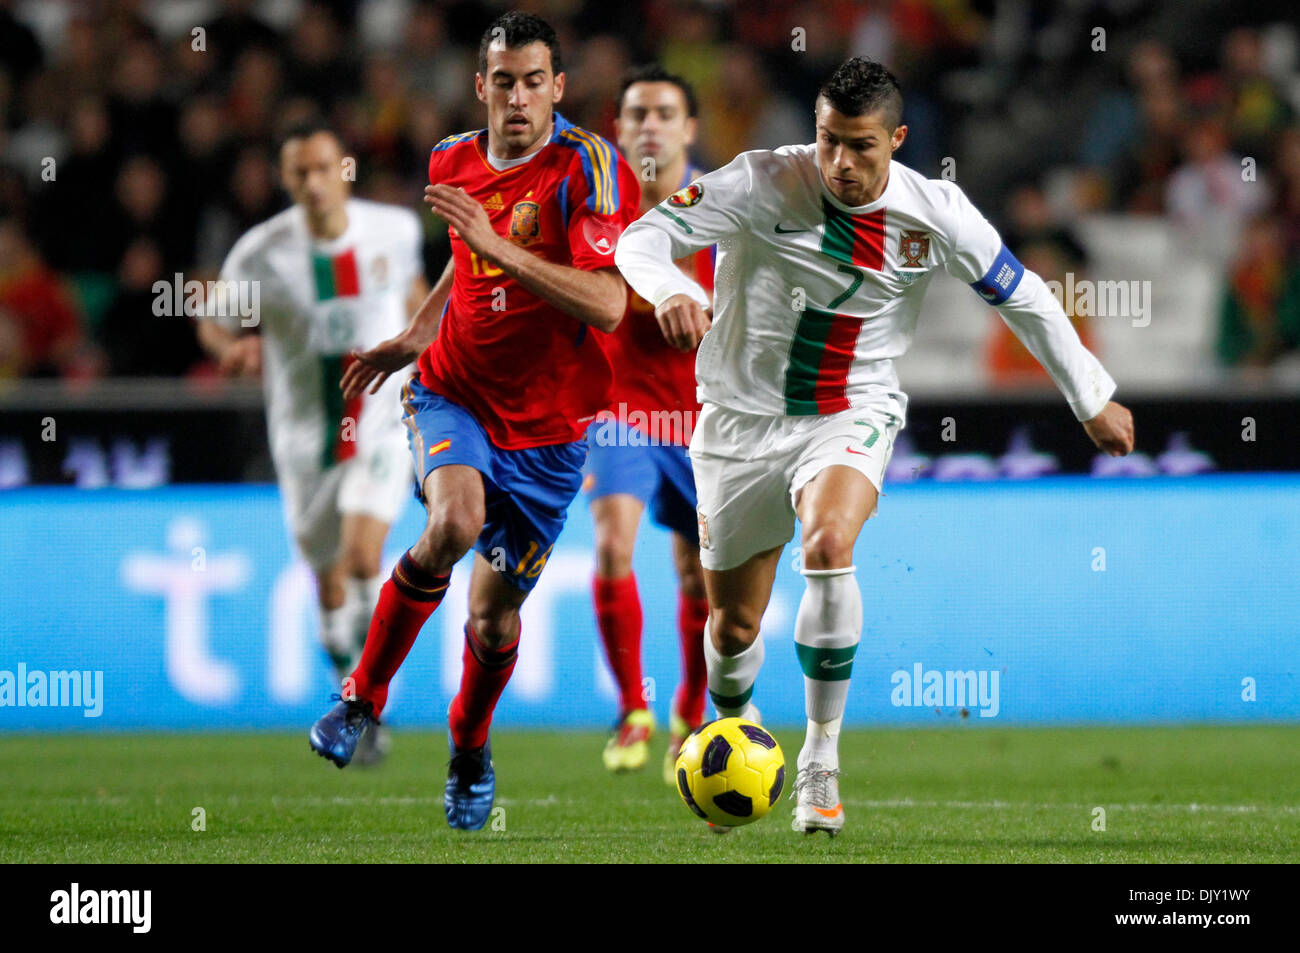 Nov 17, 2010 - Lisbon, Portugal - Portuguese CRISTIANO RONALDO (R) vies with Spanish SERGIO BUSQUETS (L) during their soccer match to promote the candidacy of the two countries to the World Cup for 2018 and 2022 at Luz Stadium in Lisbon. (Credit Image: © Paul Cordeiro/ZUMApress.com) Stock Photo